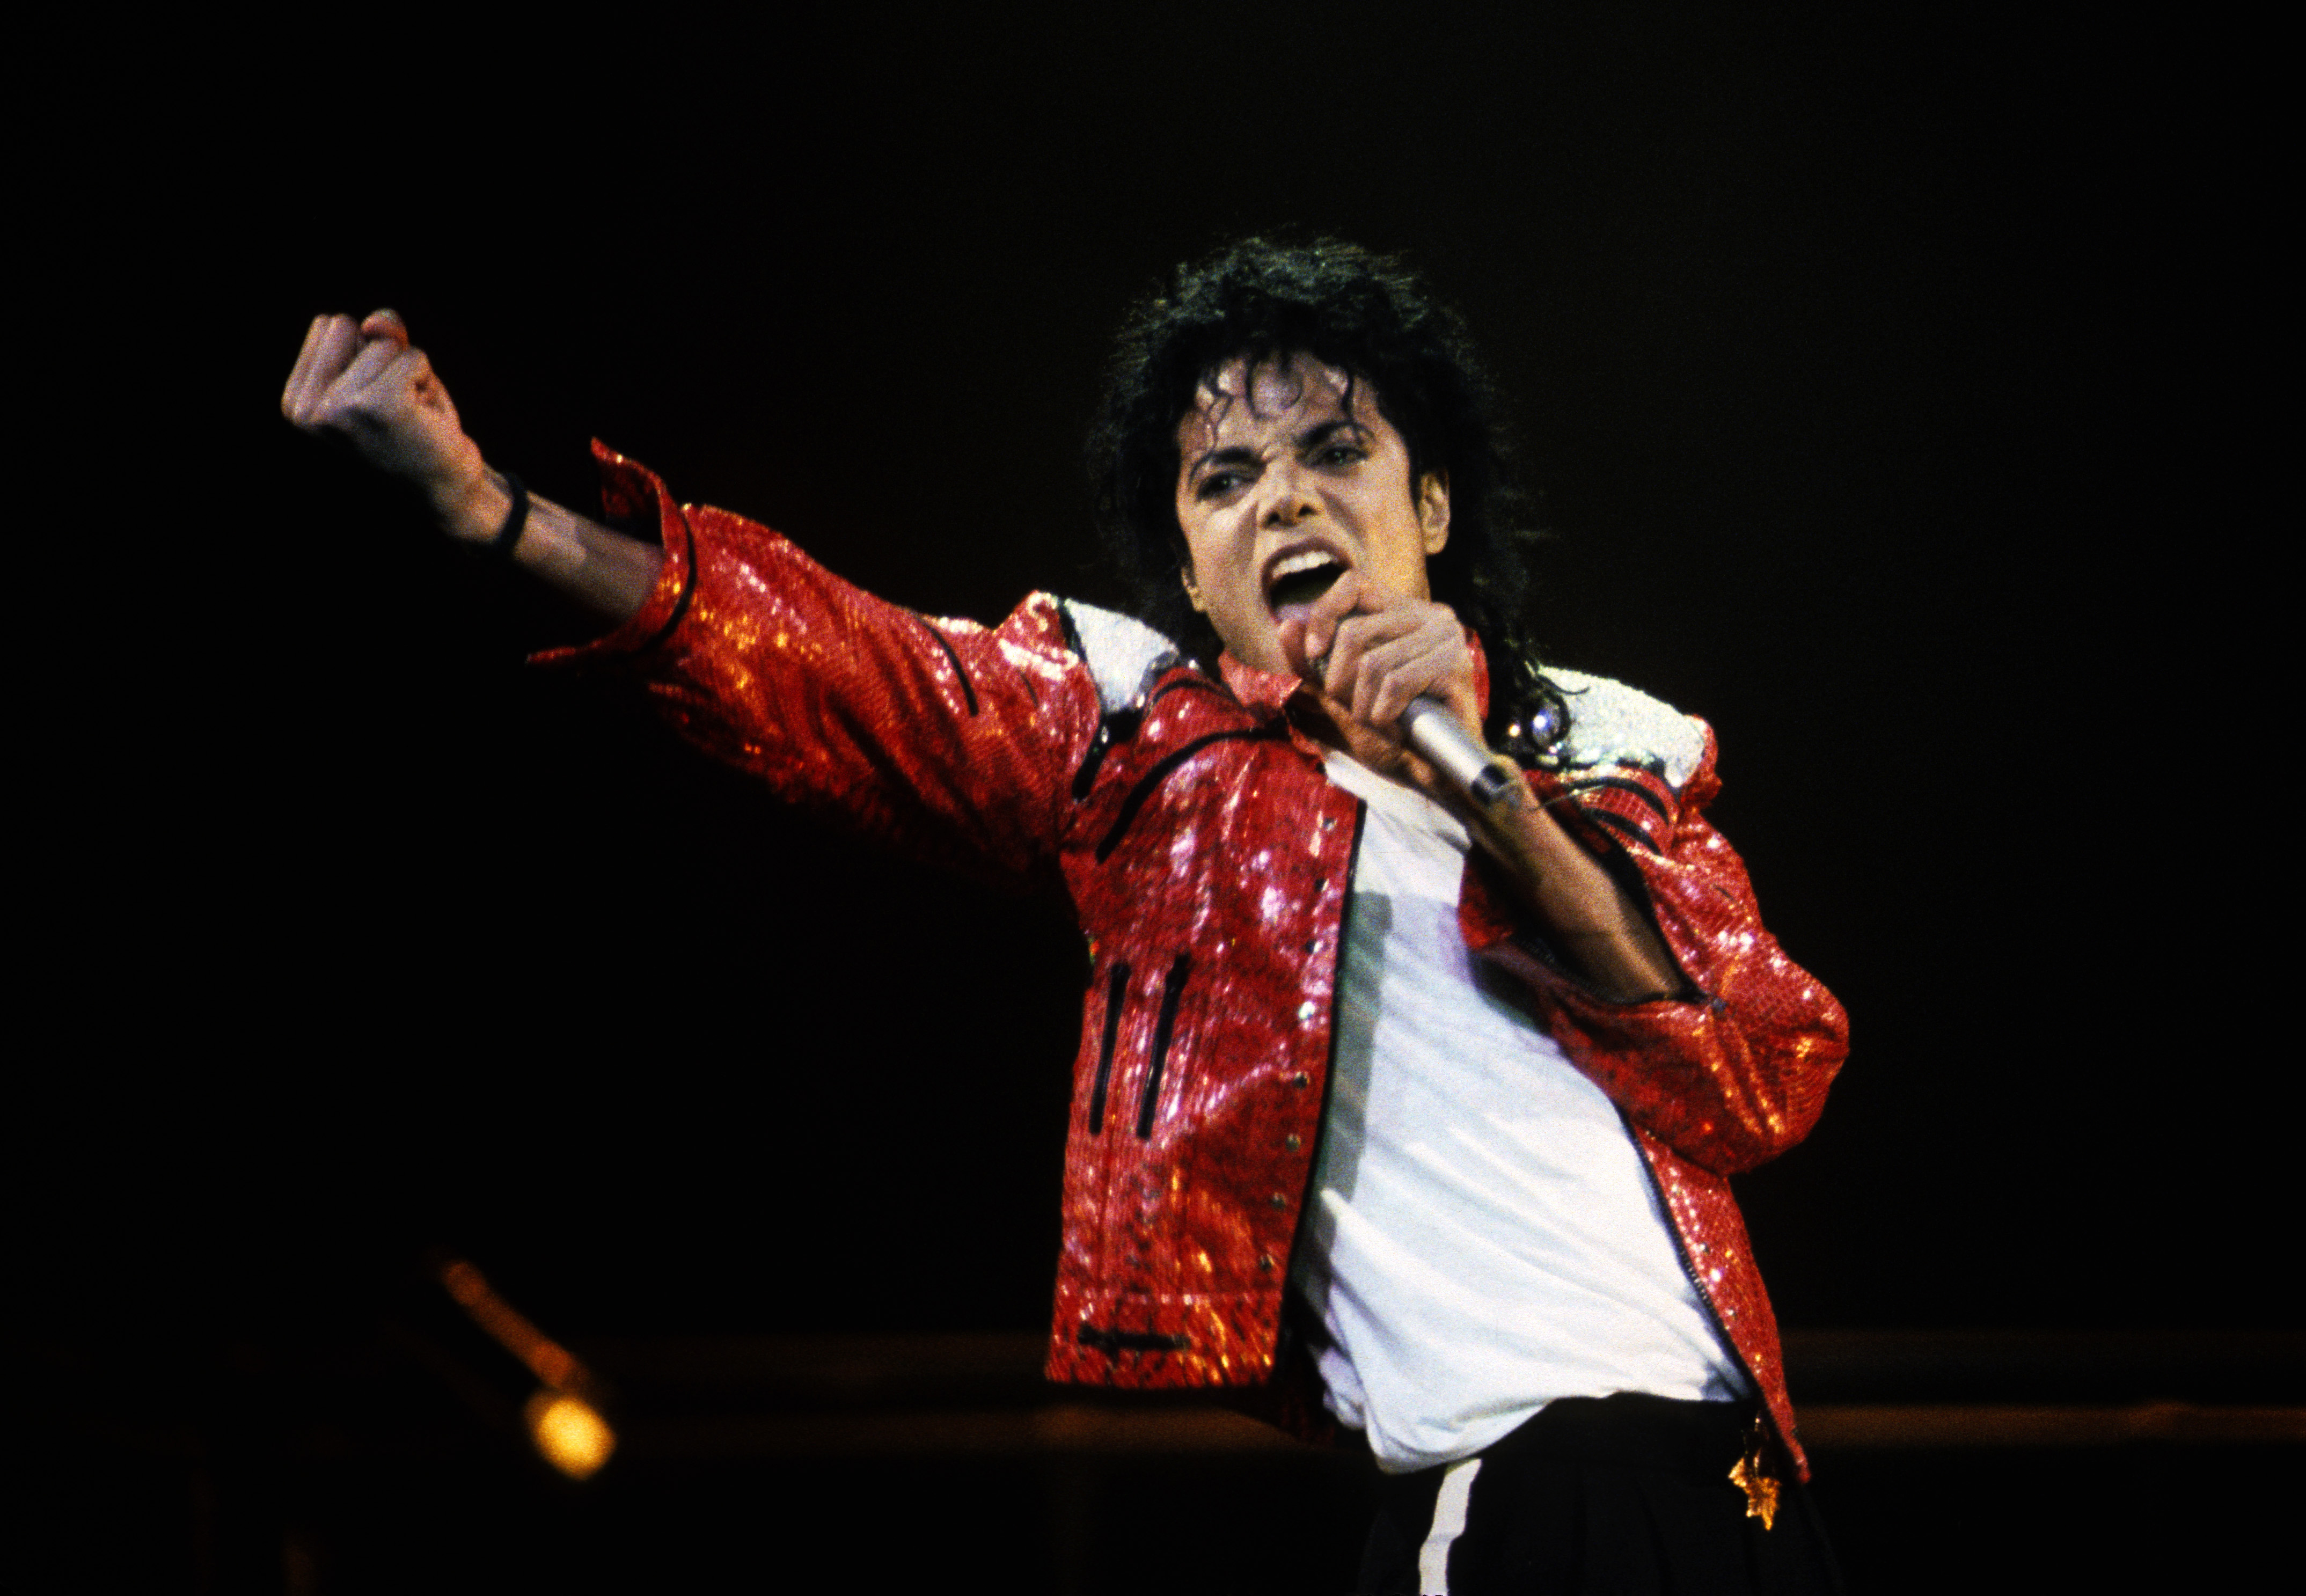 Michael Jackson's Thriller Is No Longer the Best-Selling Album of All Time. Here's the New #1